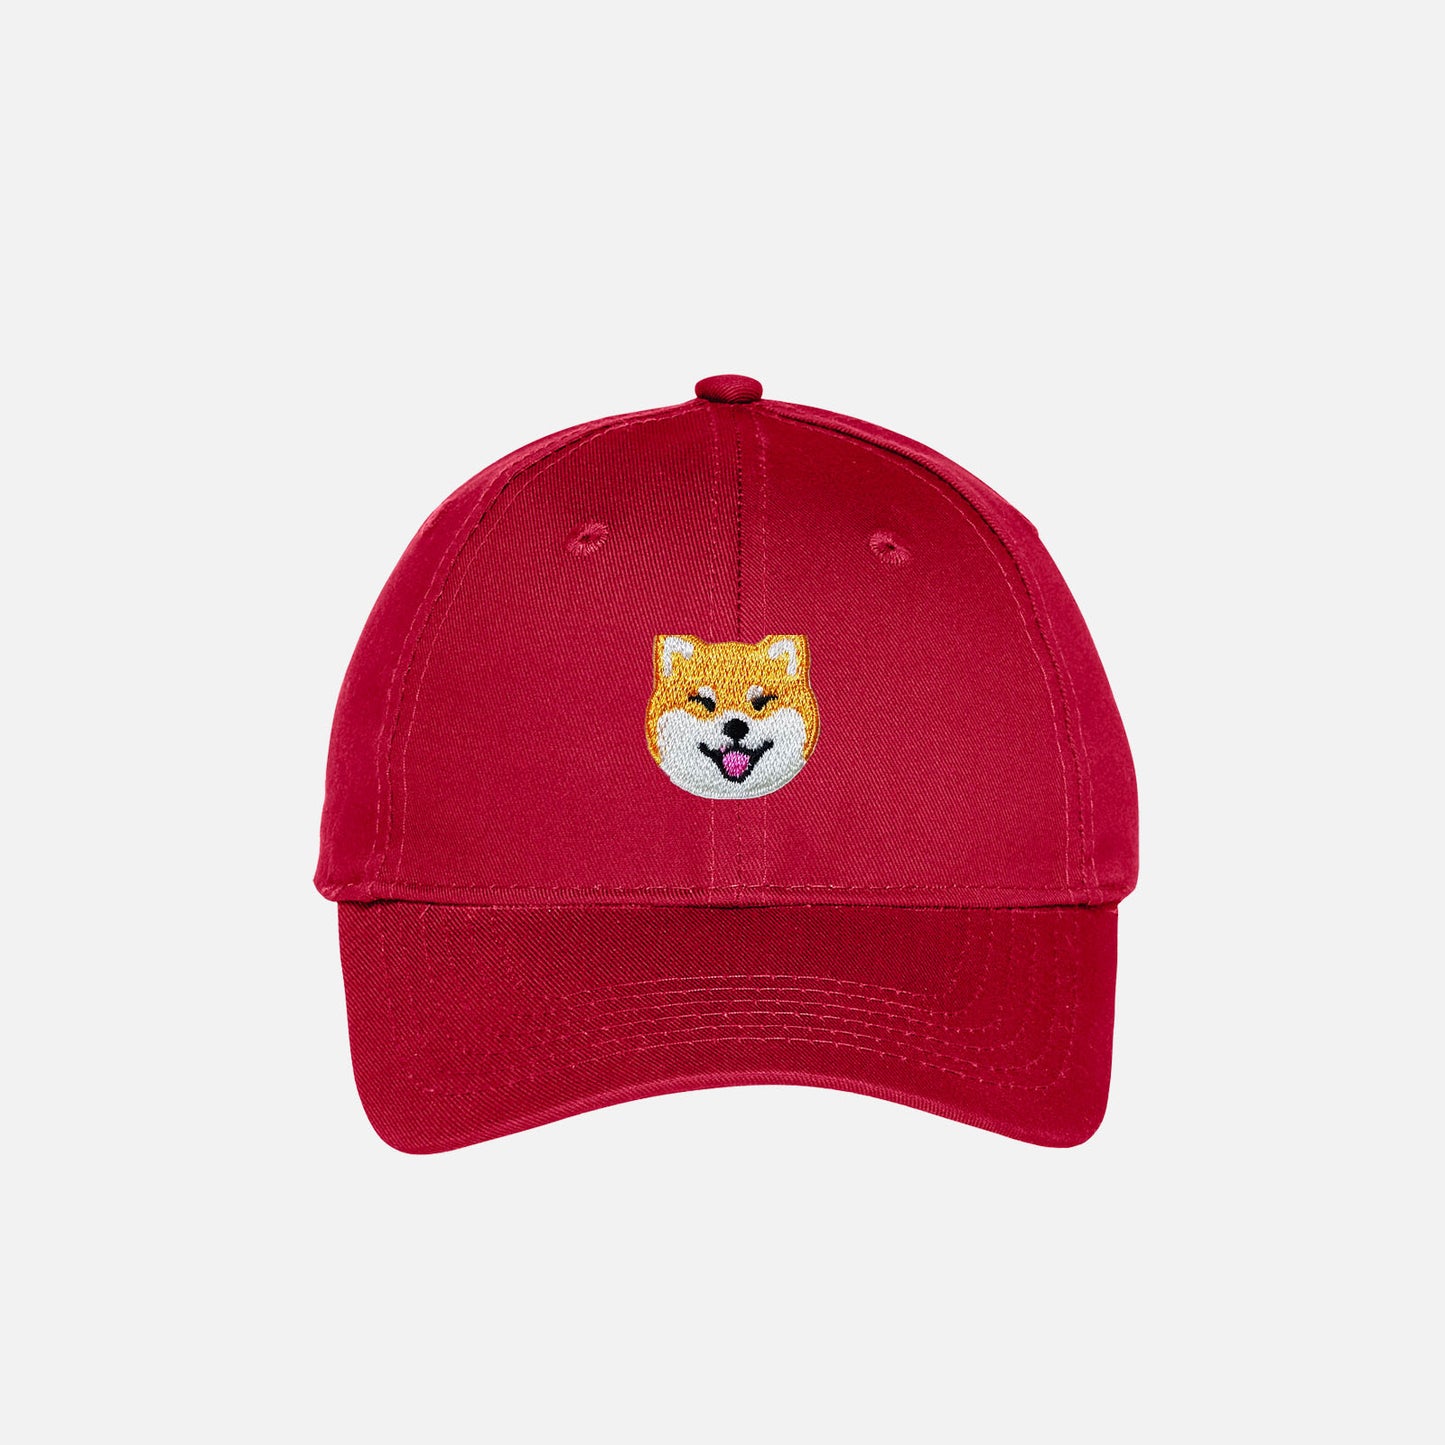 Red Custom Dog Kids Hats personalized and embroidered on the front.